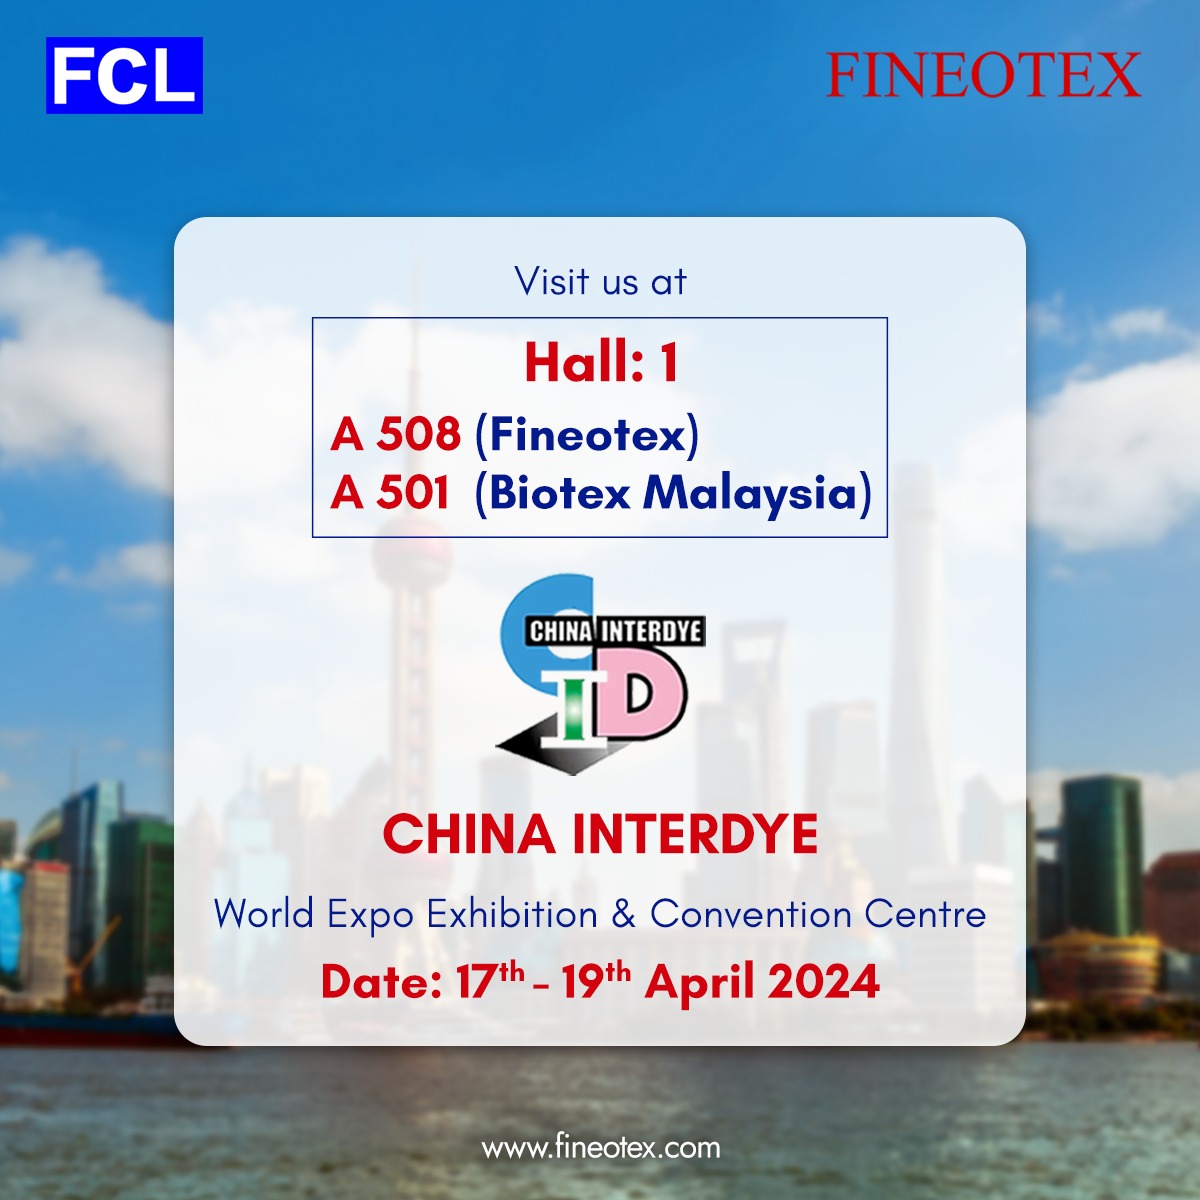 Fineotex welcomes you all at China Interdye, SWEECC, Shanghai, 17th-19th April 24.